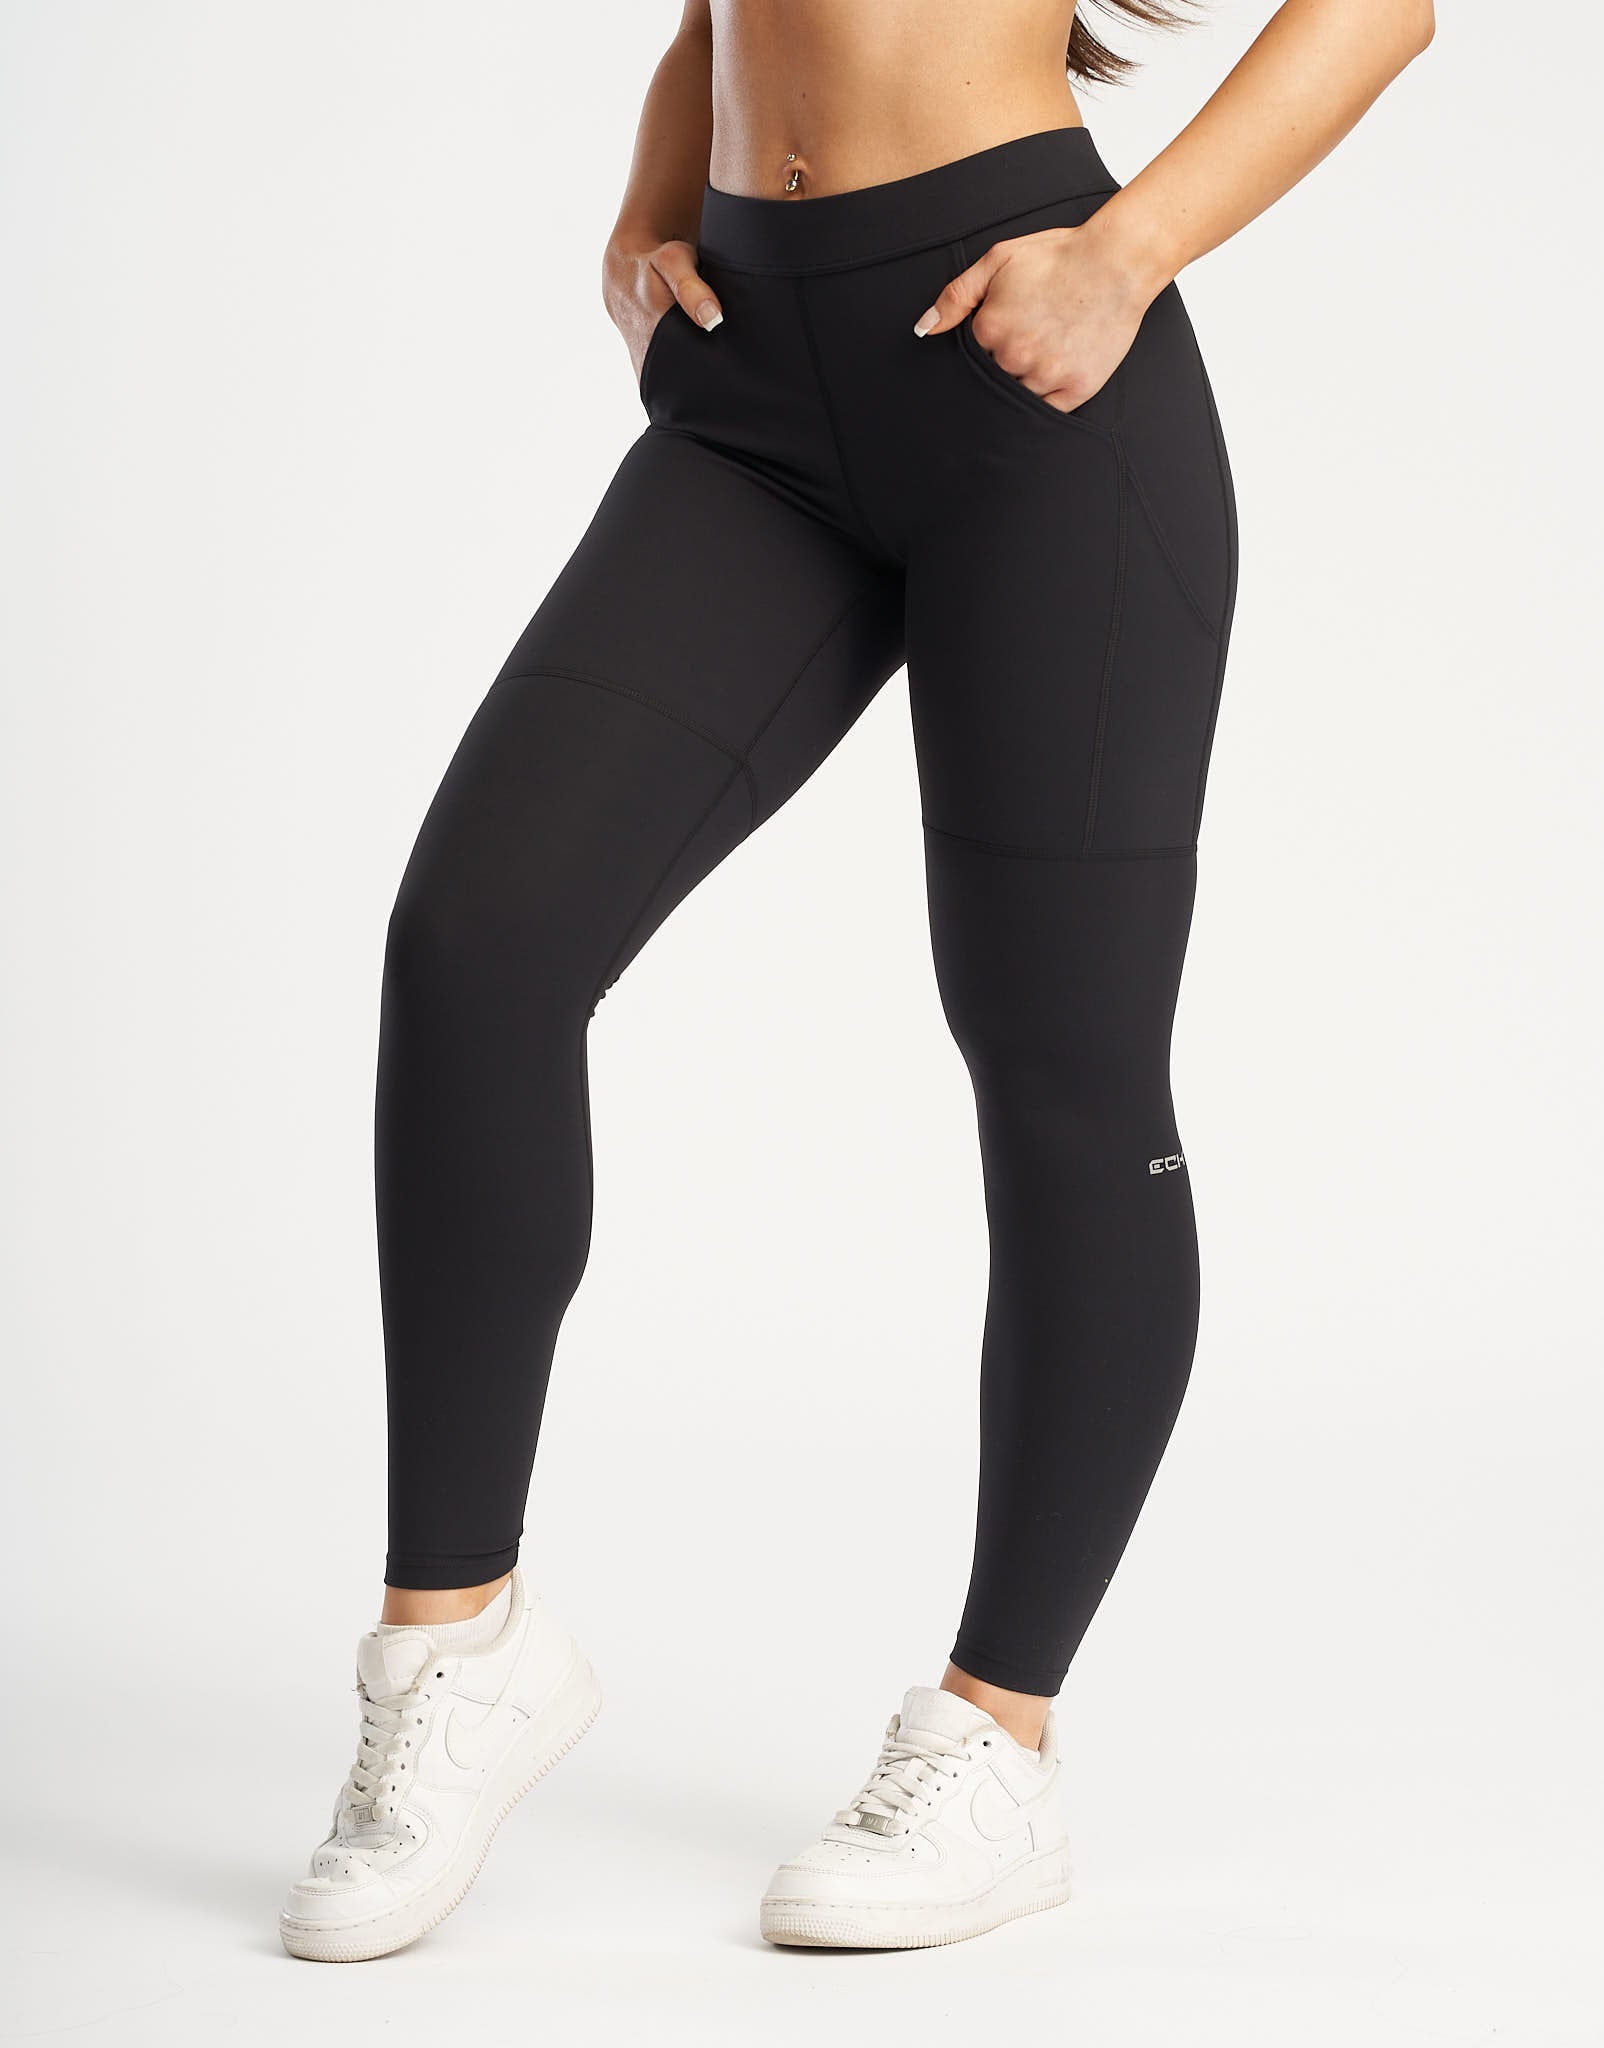 🦋 oolala ButterflySoft™ | Solid Black with Pockets Women's Leggings –  OOLALA